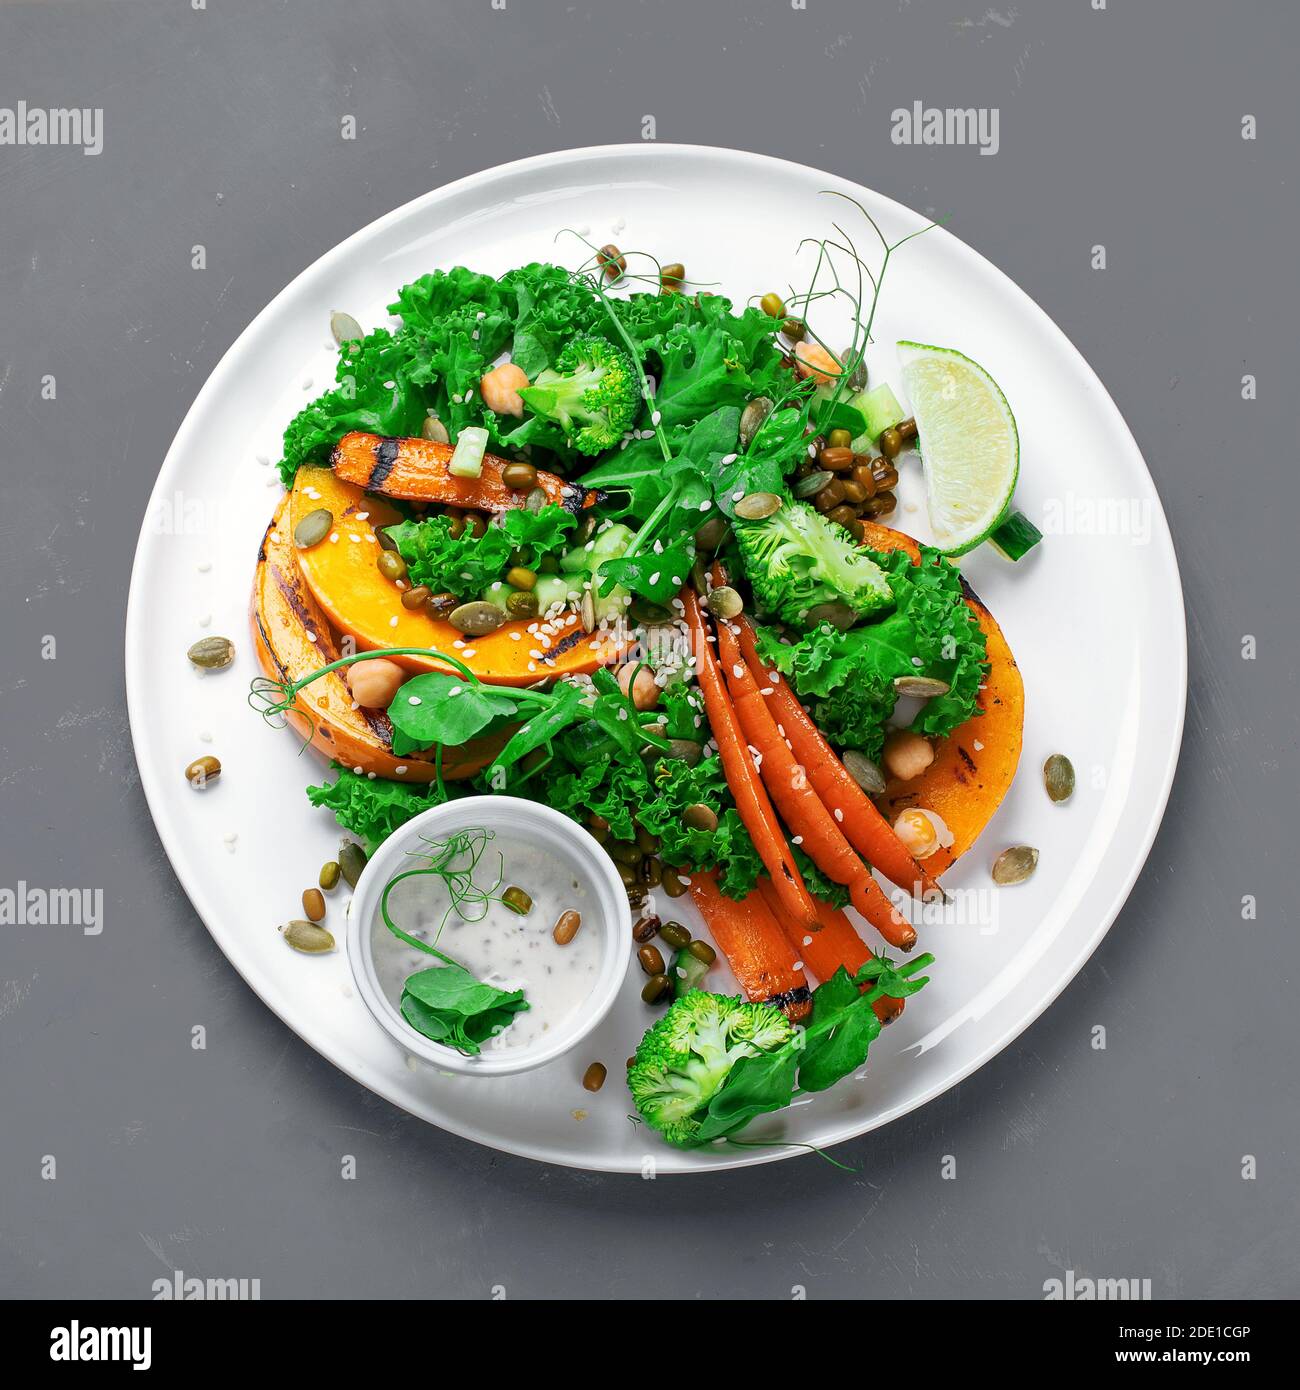 Grilled pumpkin salad with vegetables. Healthy vegan food. Top view Stock Photo